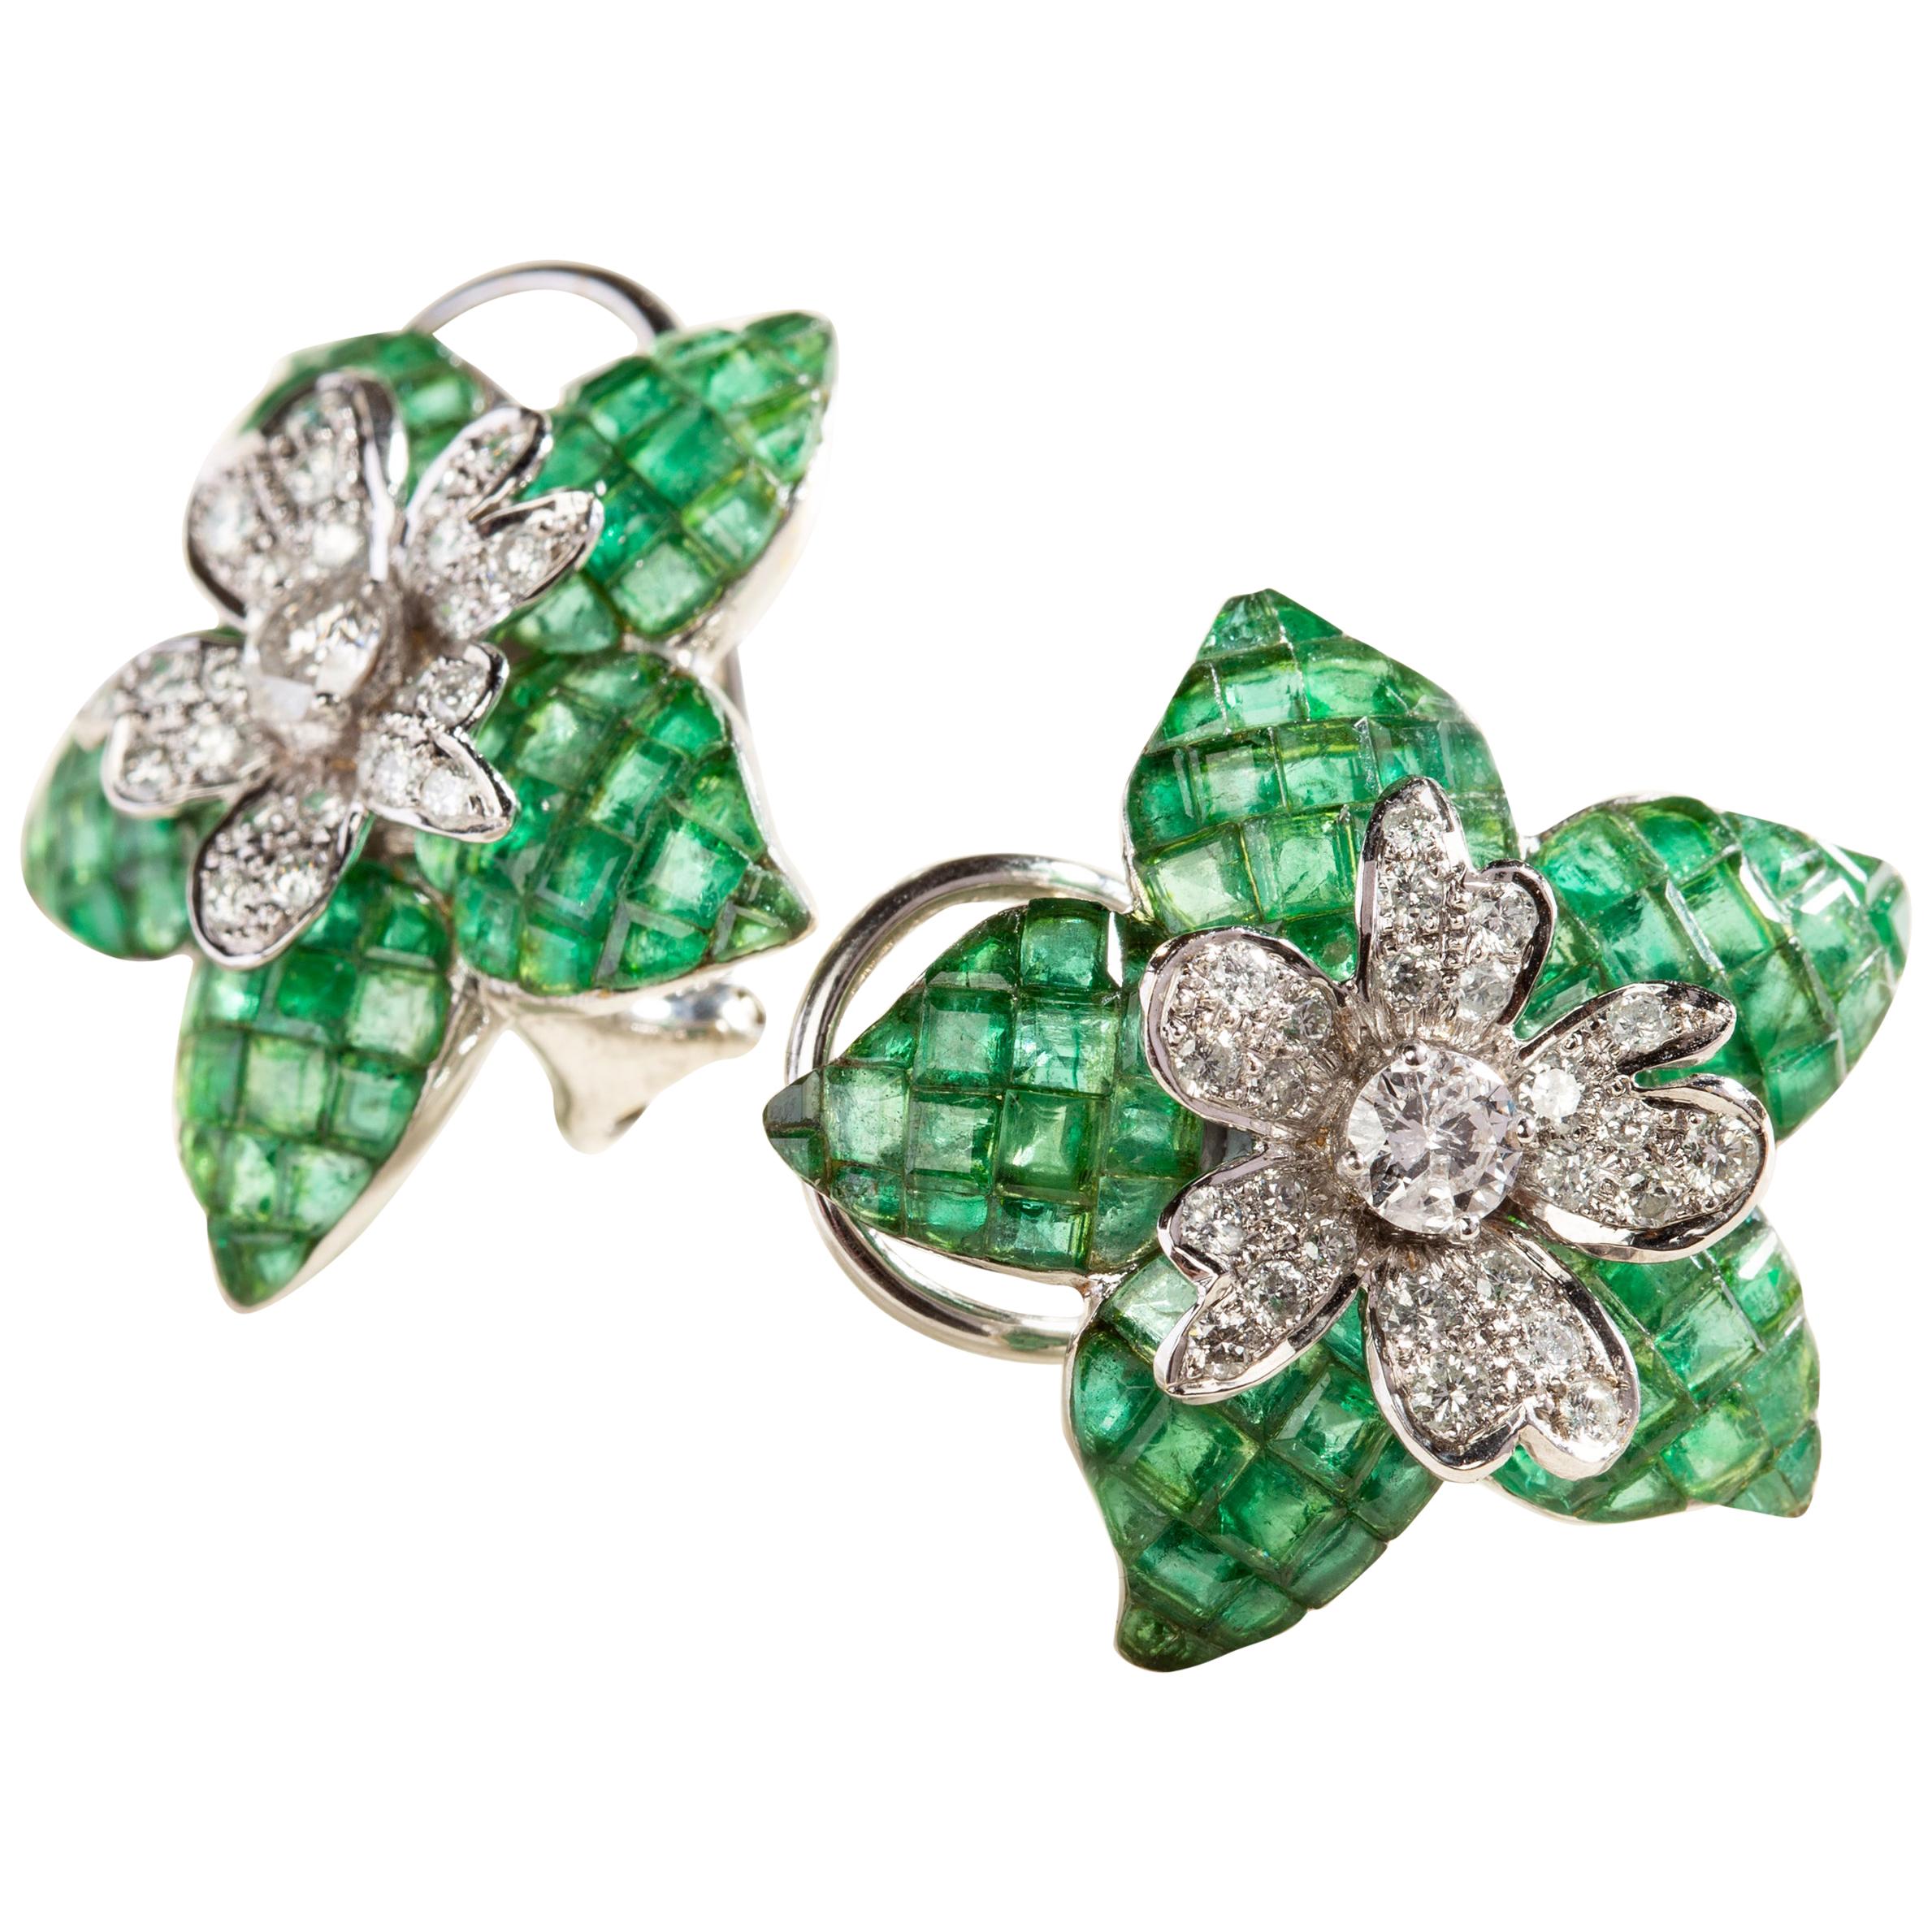 Emerald Milkweed Flower Earrings set in 14 Karat White Gold with Diamonds and For Sale